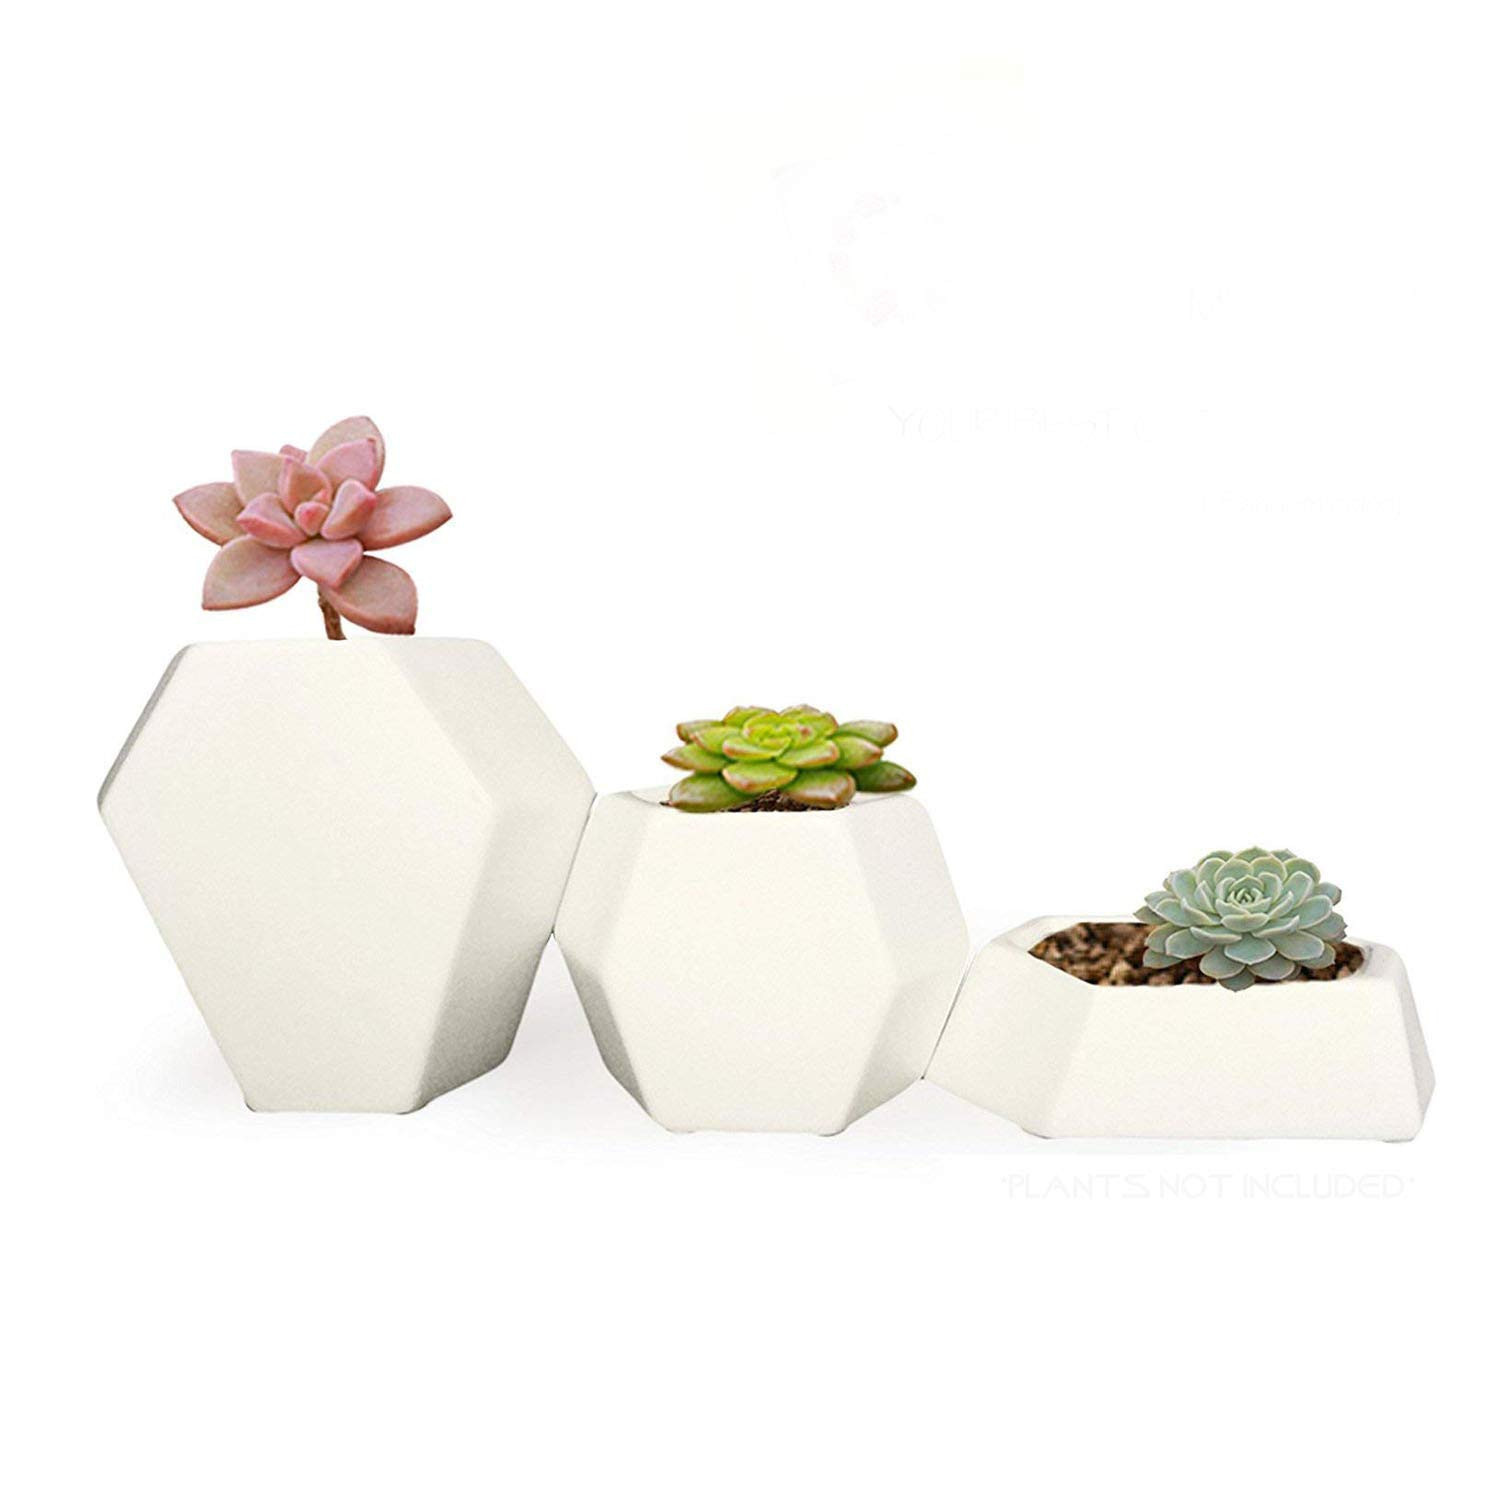 29 Lovable Rose Gold Geometric Vase 2024 free download rose gold geometric vase of amazon com ceramic small collection geometric planter 3 pack regarding amazon com ceramic small collection geometric planter 3 pack white hexagon succulent plant 